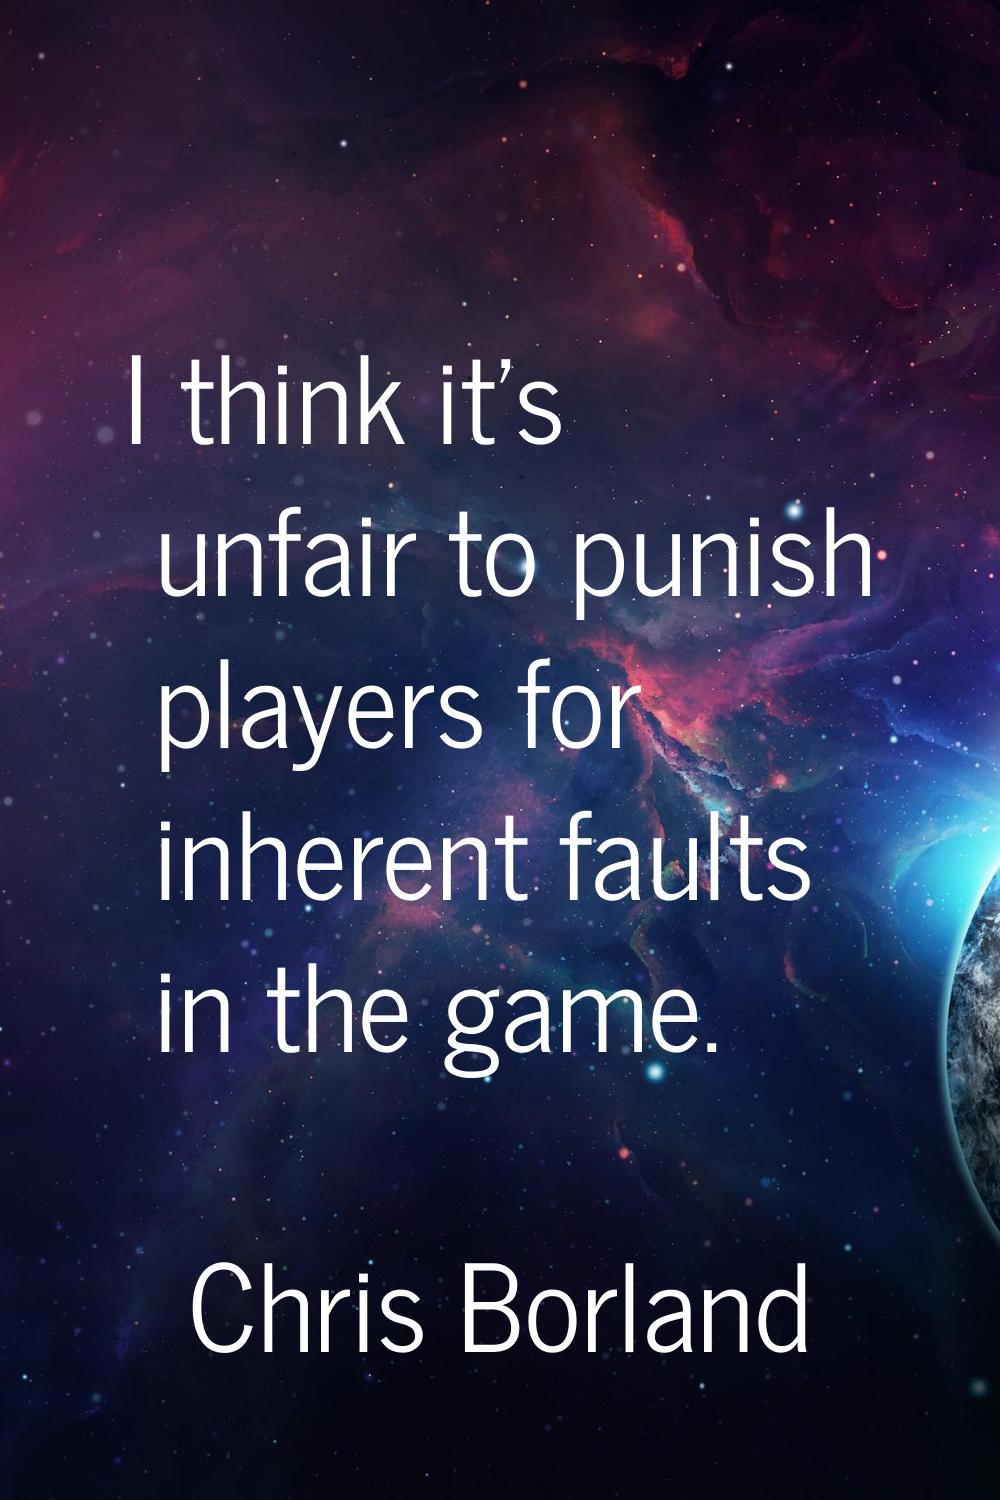 I think it's unfair to punish players for inherent faults in the game.